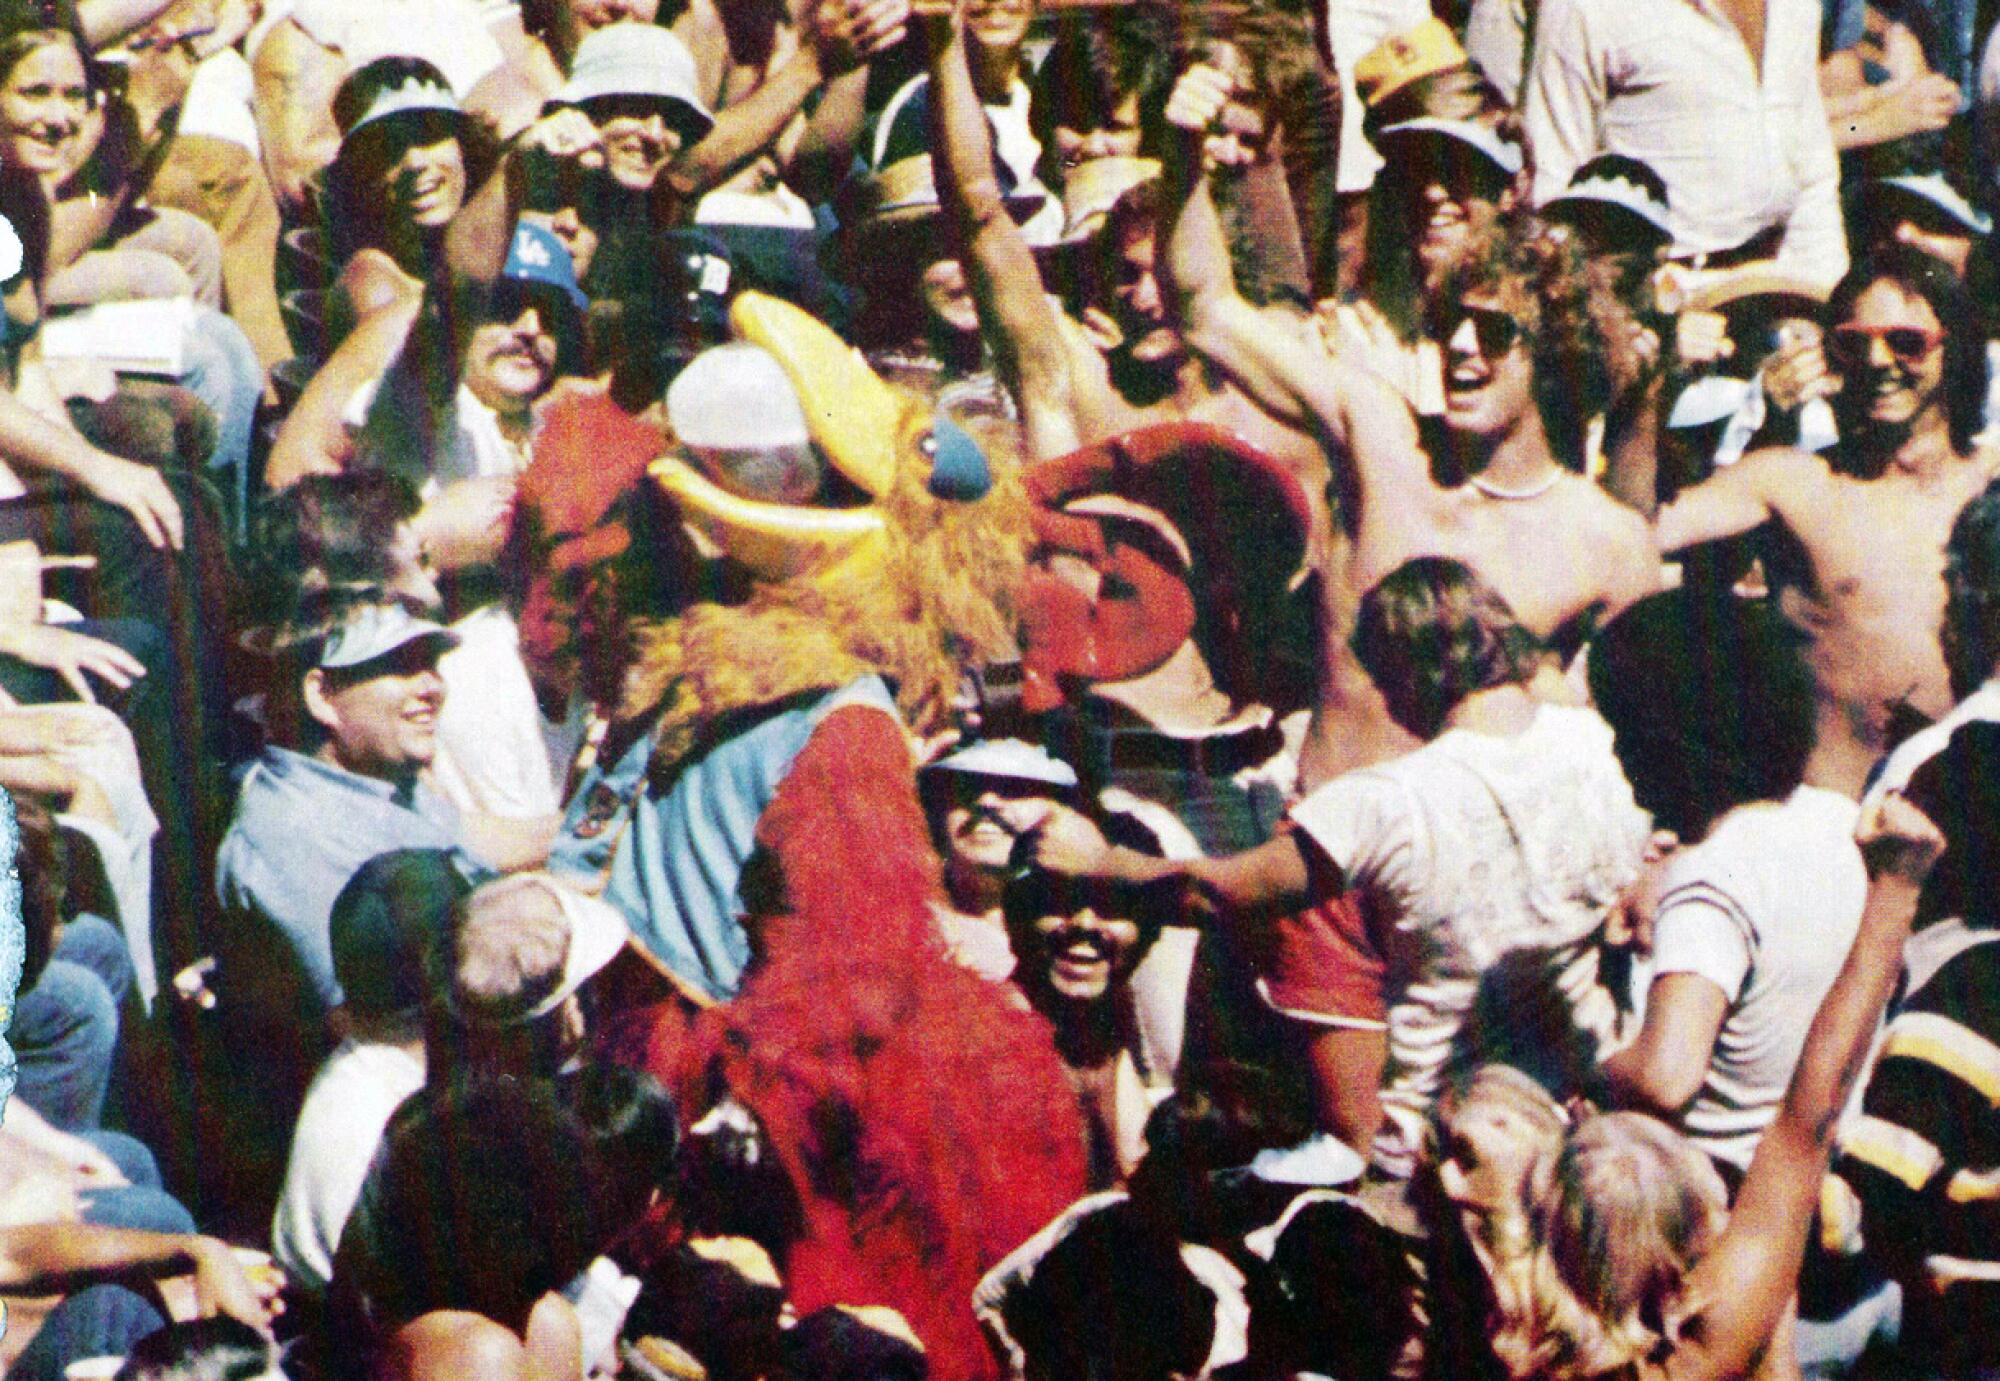 The KGB Chicken became a fan favorite in the stands in the mid-1970s at San Diego Stadium.